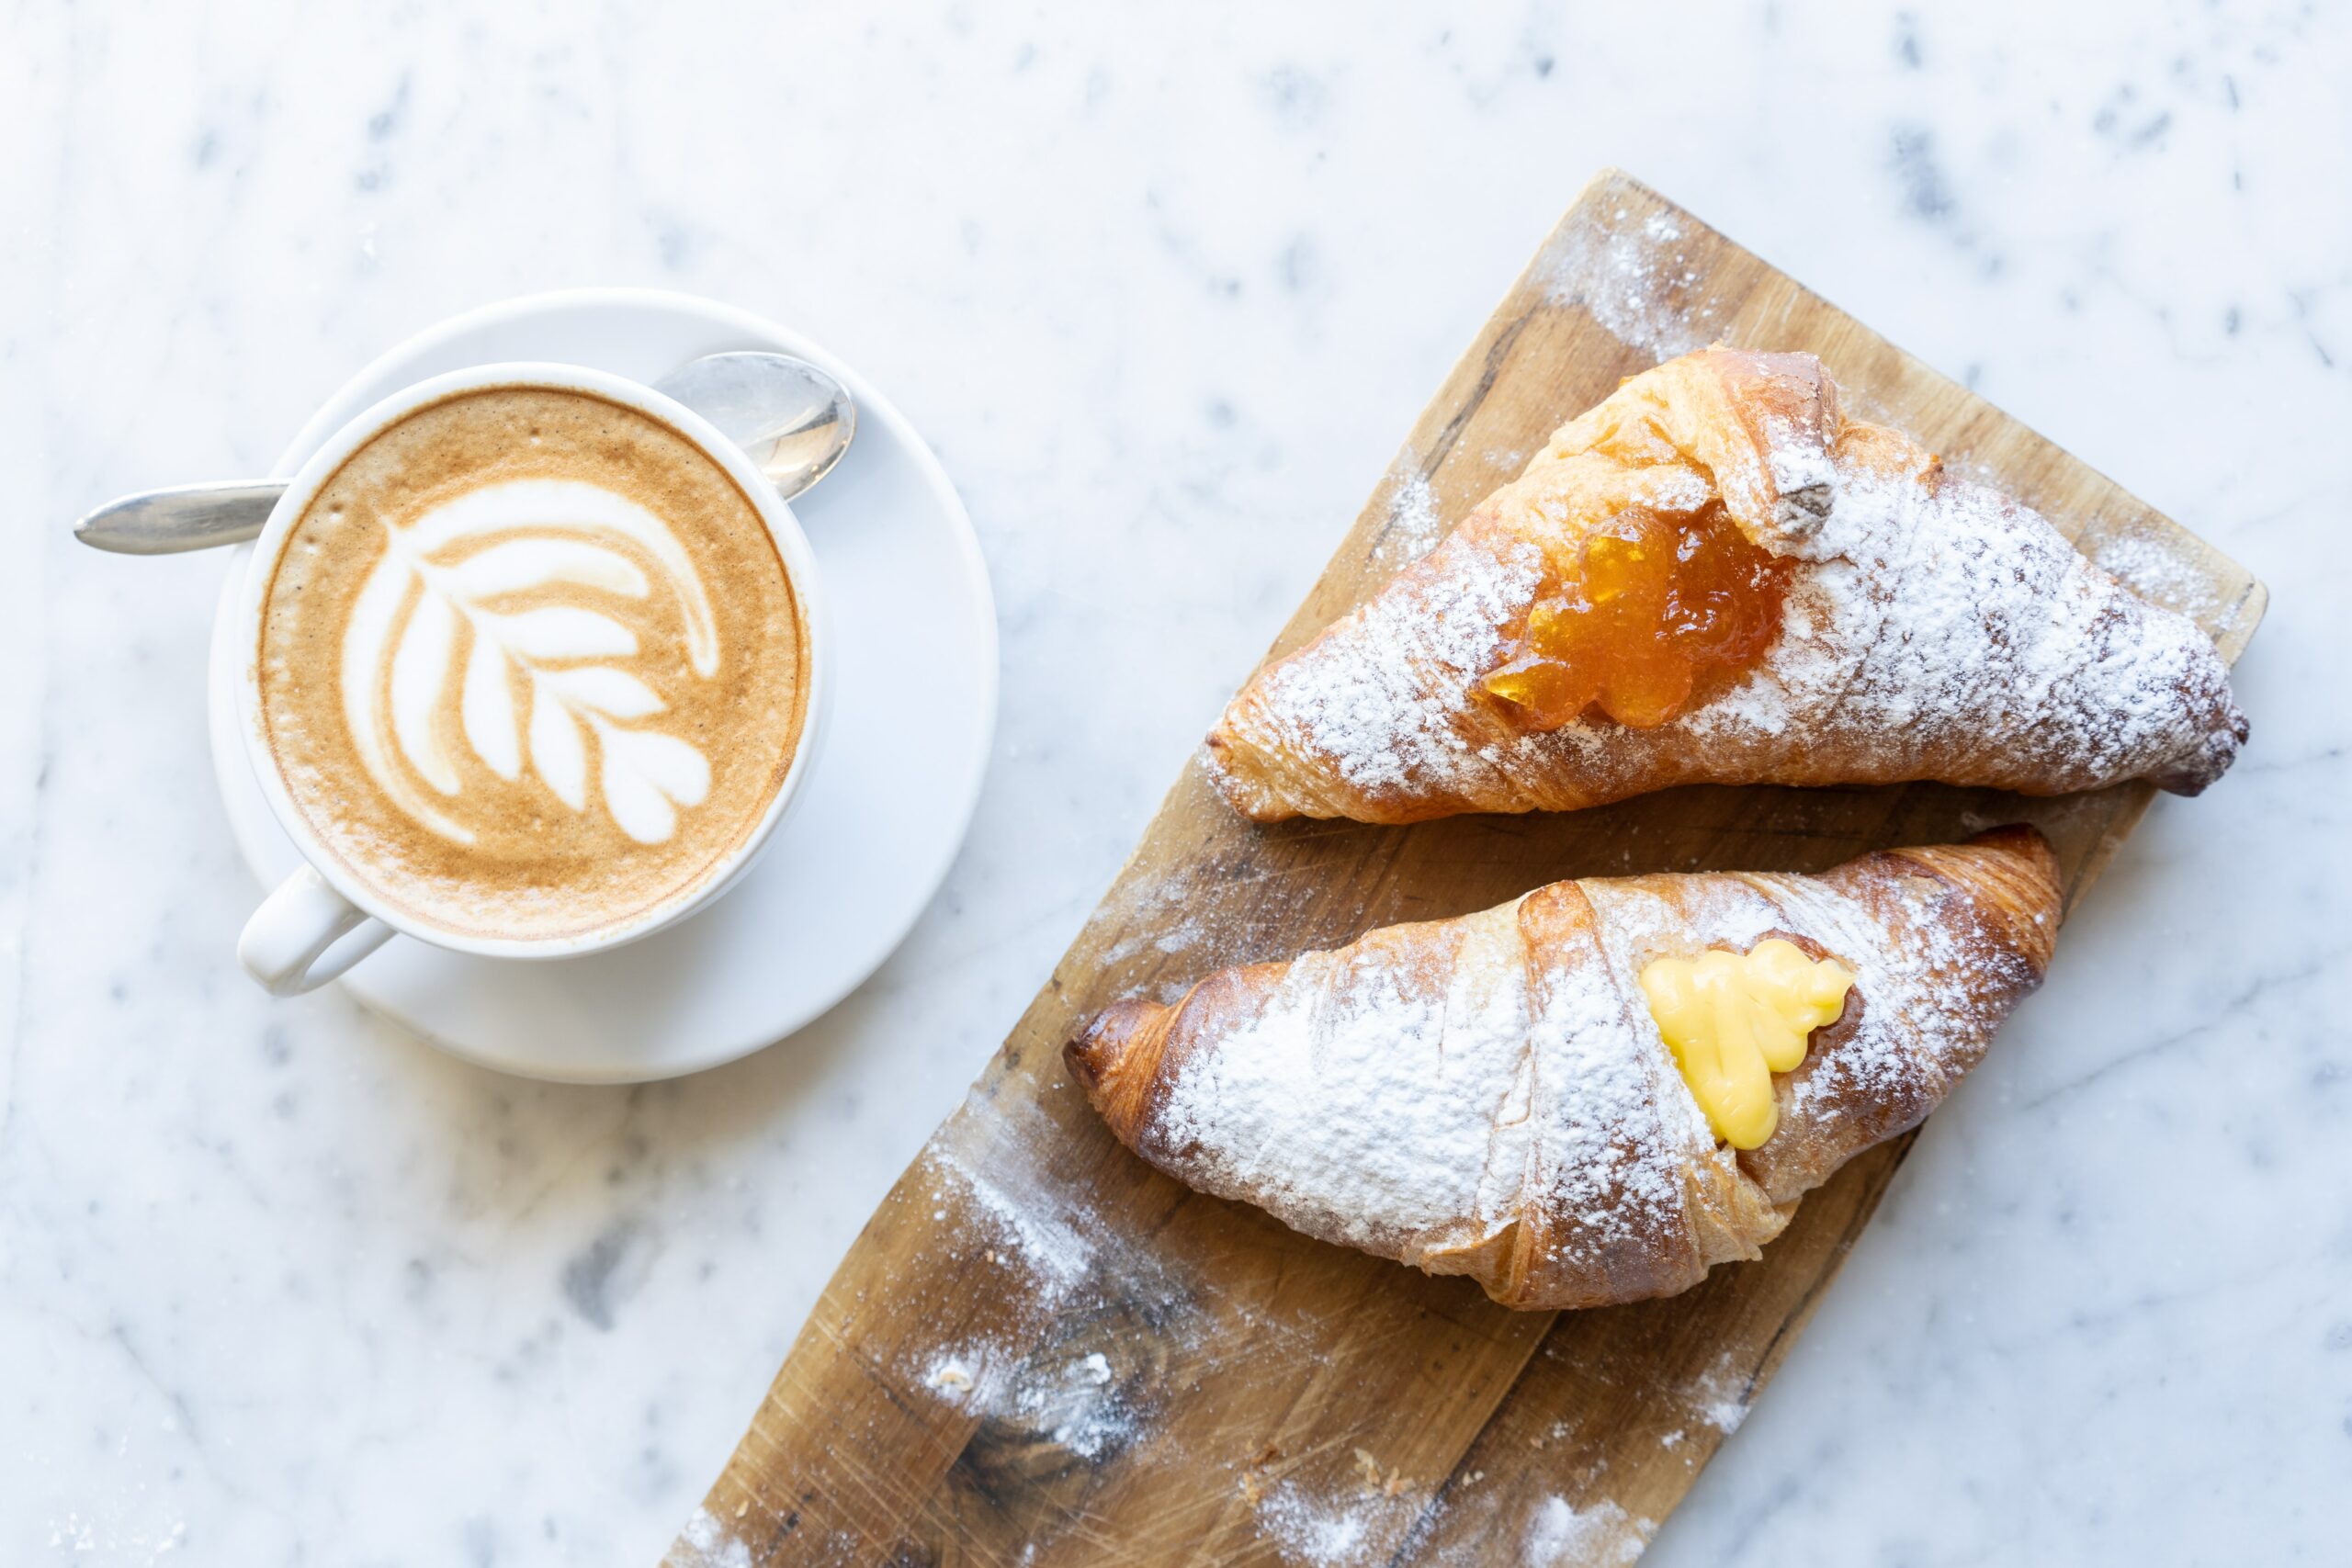 Wooden plate with two Italian cornetti pastries and a cappucino